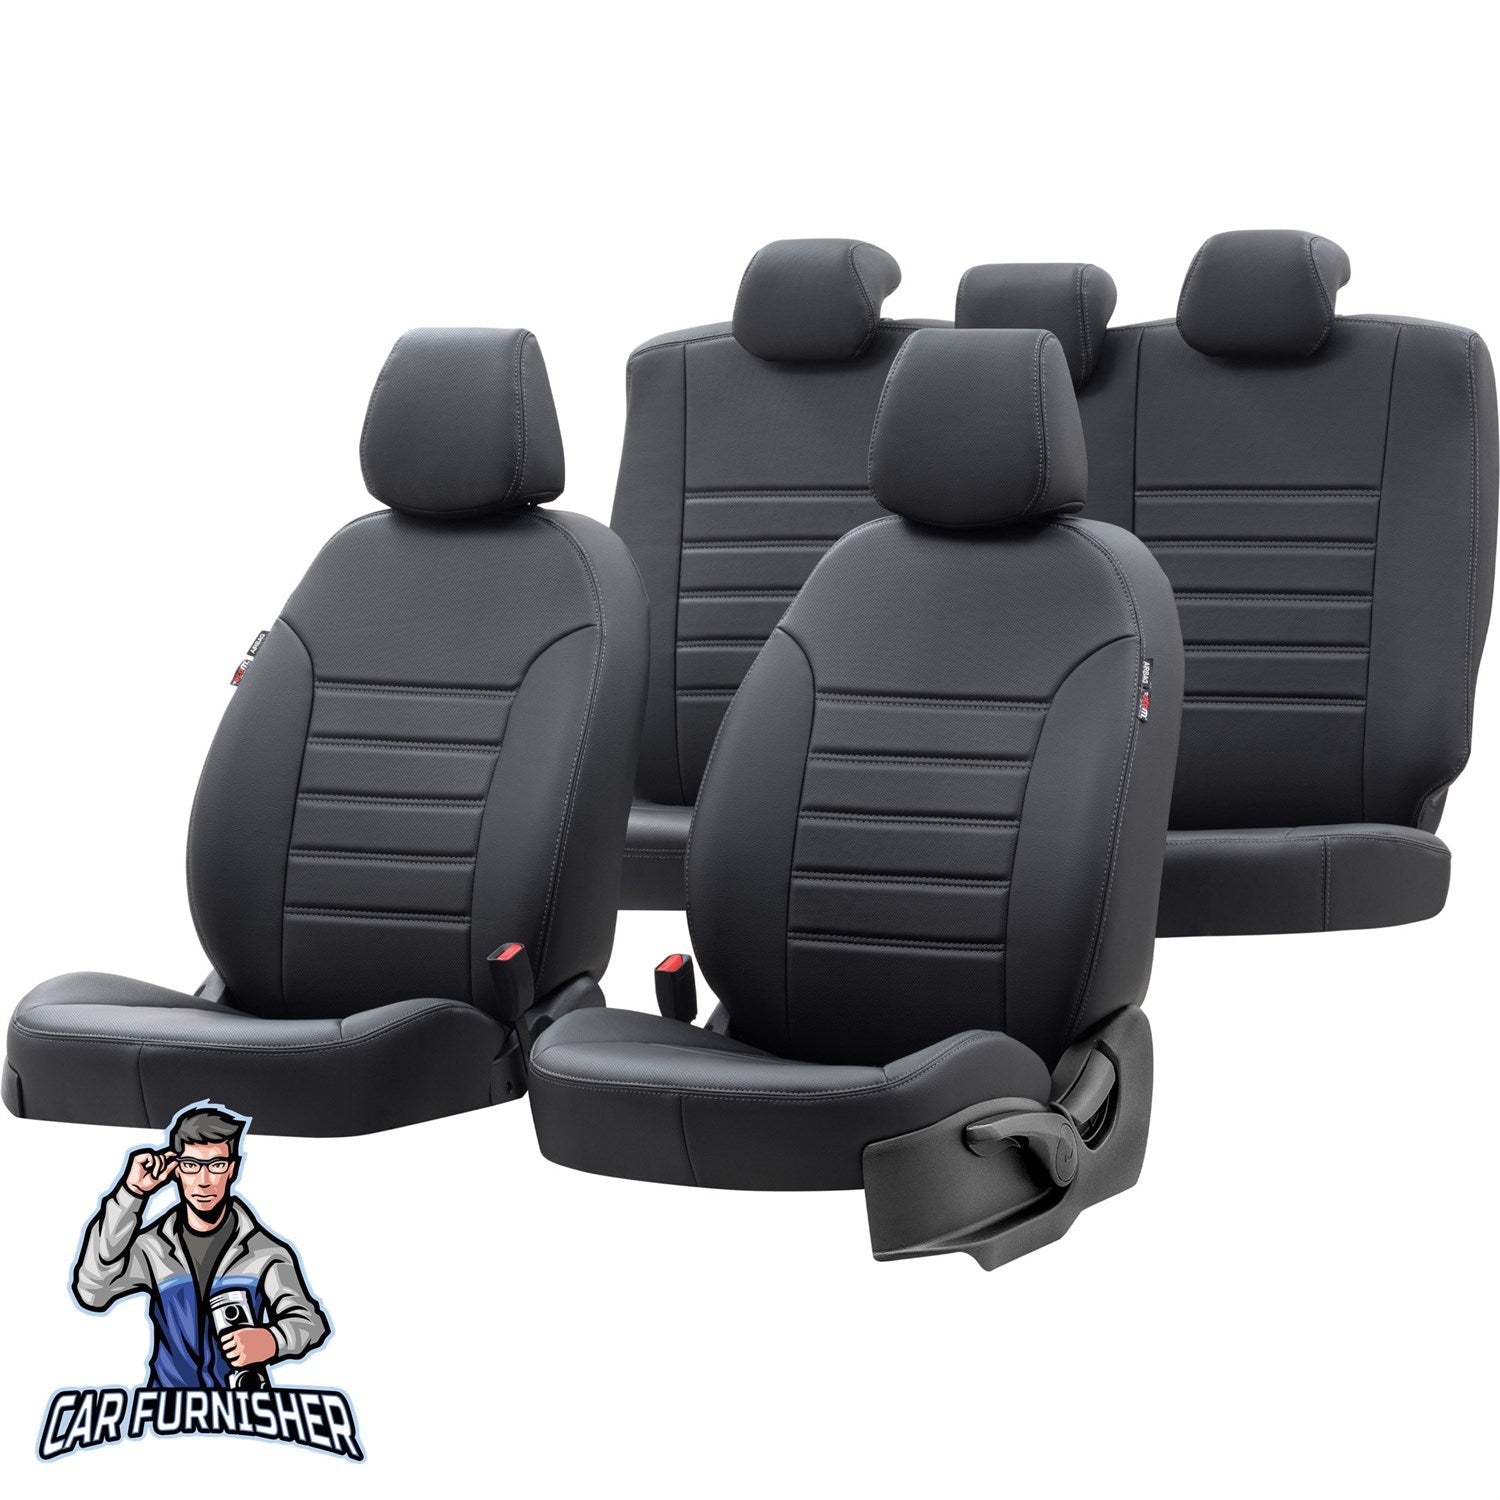 Hyundai H-100 Seat Covers Istanbul Leather Design Black Leather